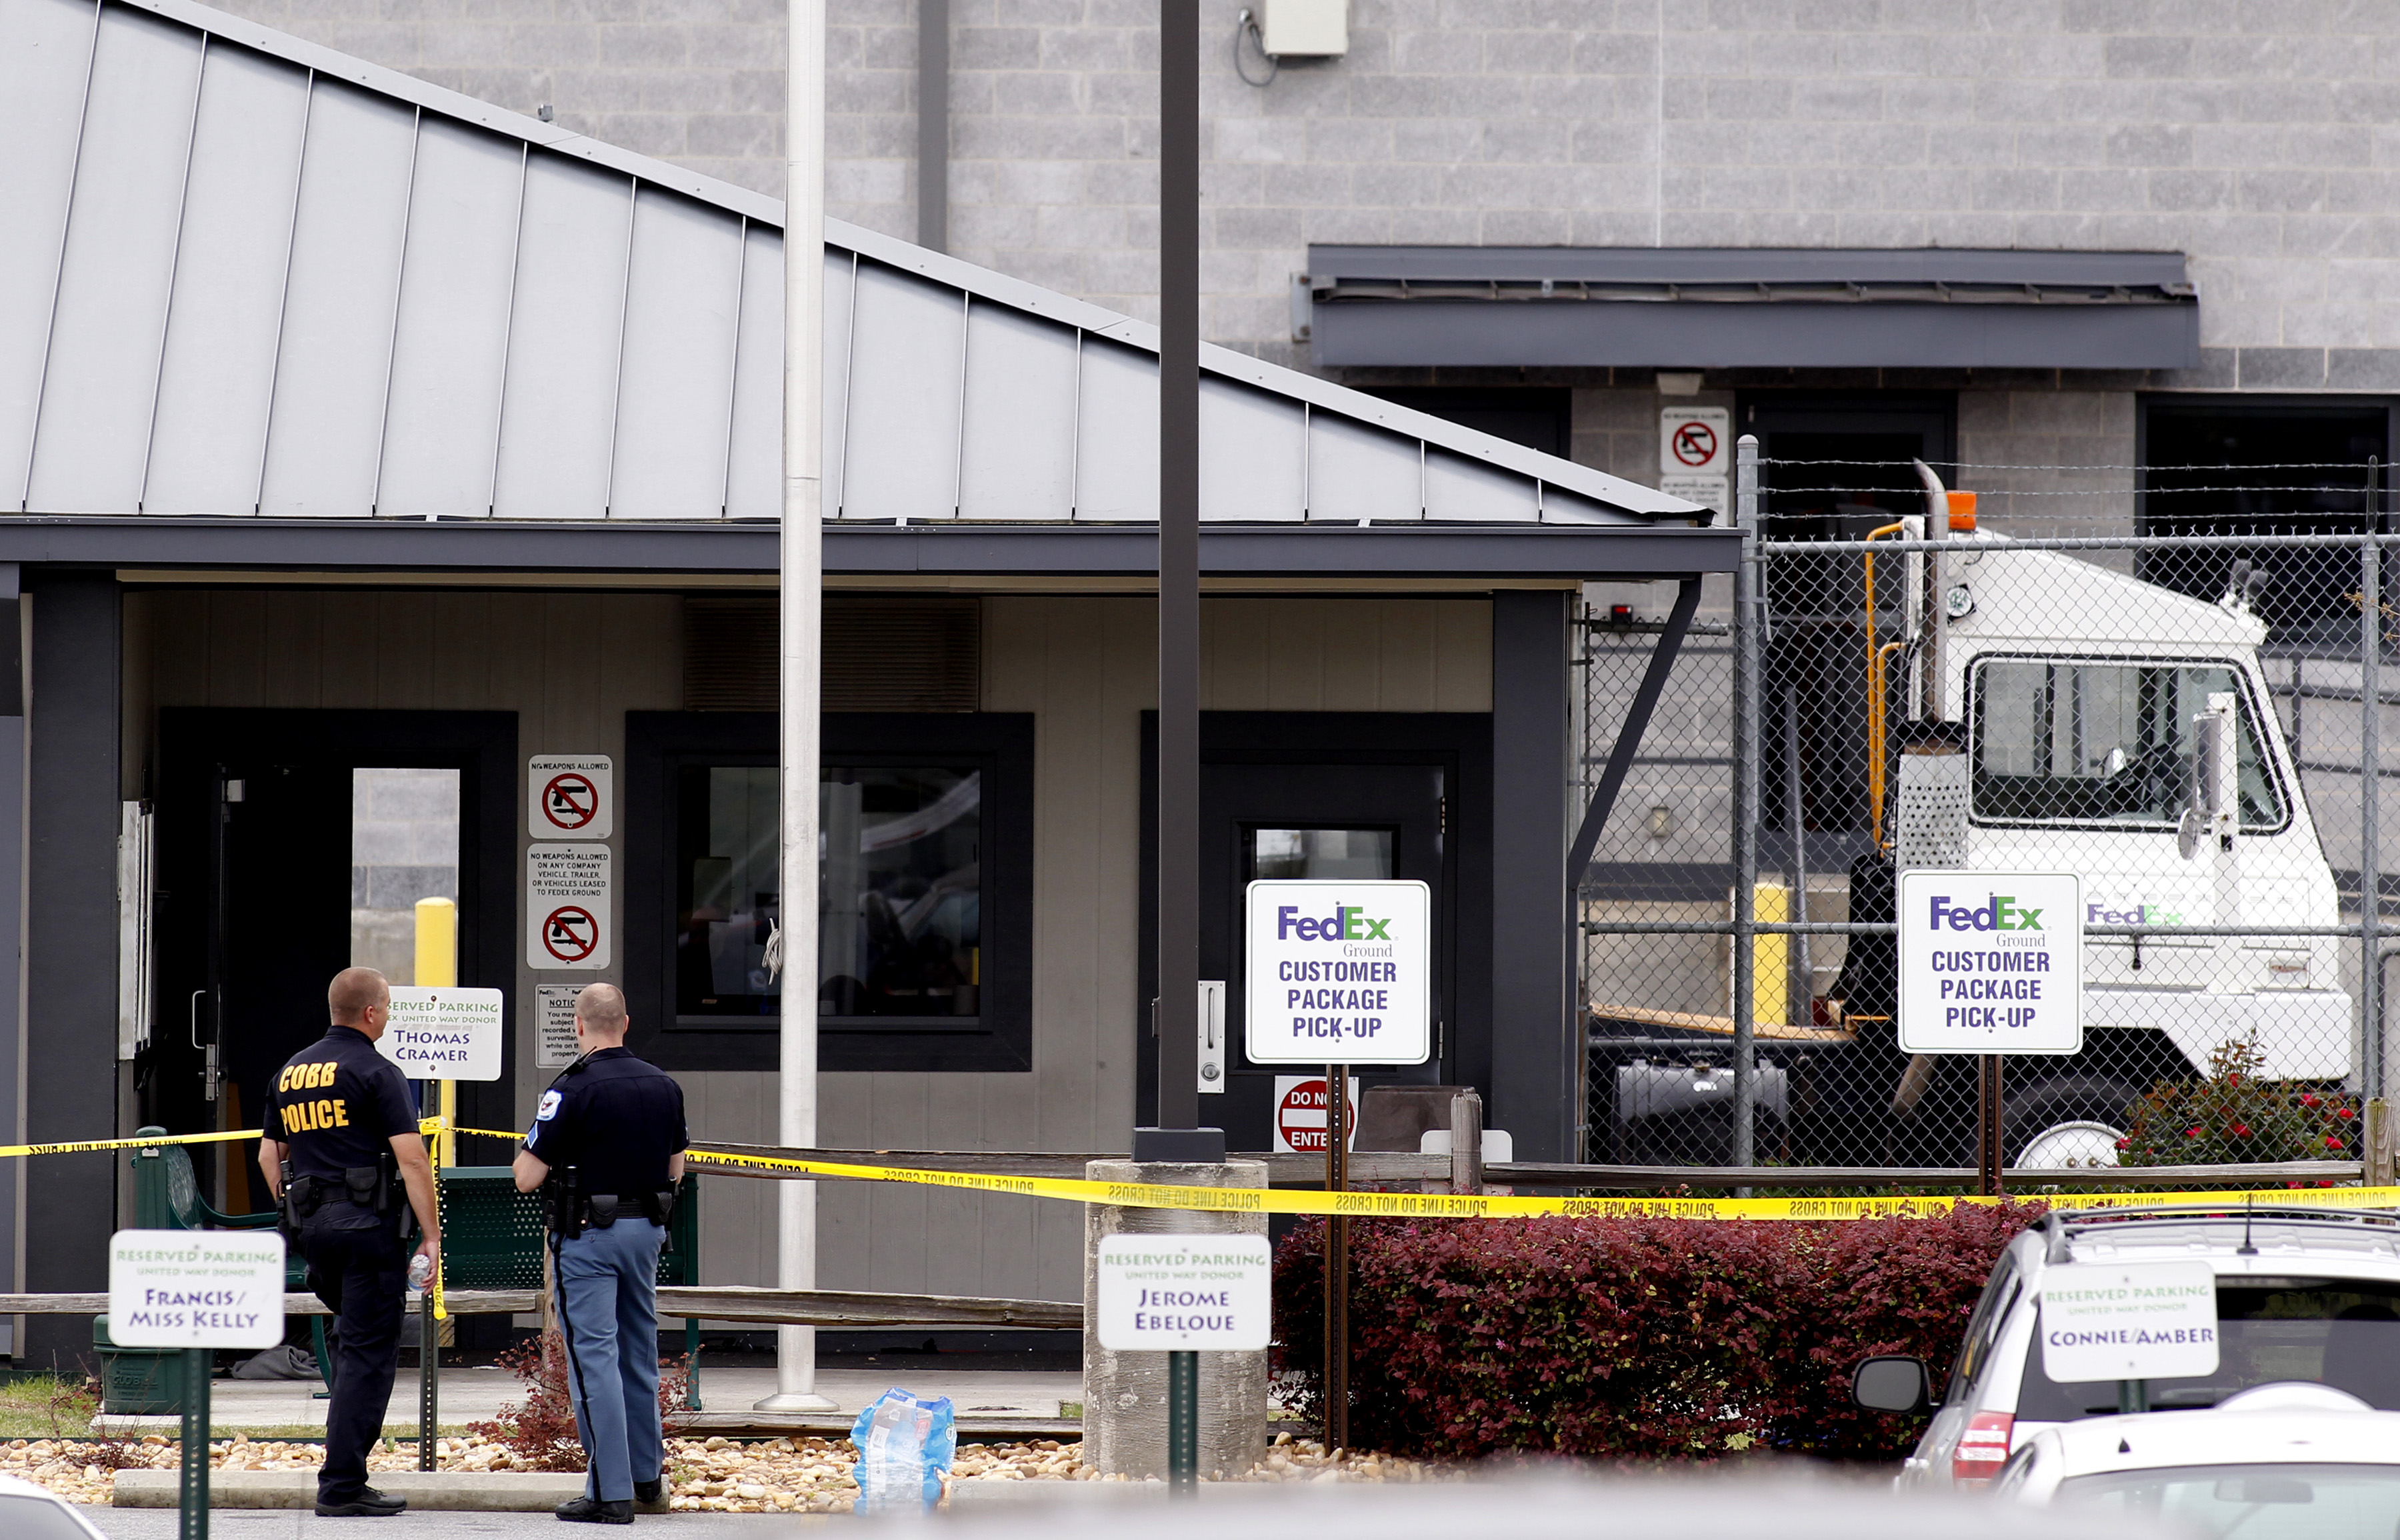 Cobb County police investigate the scene at the guard shack after a shooting at a FedEX Corp facility at an airport in Kennesaw